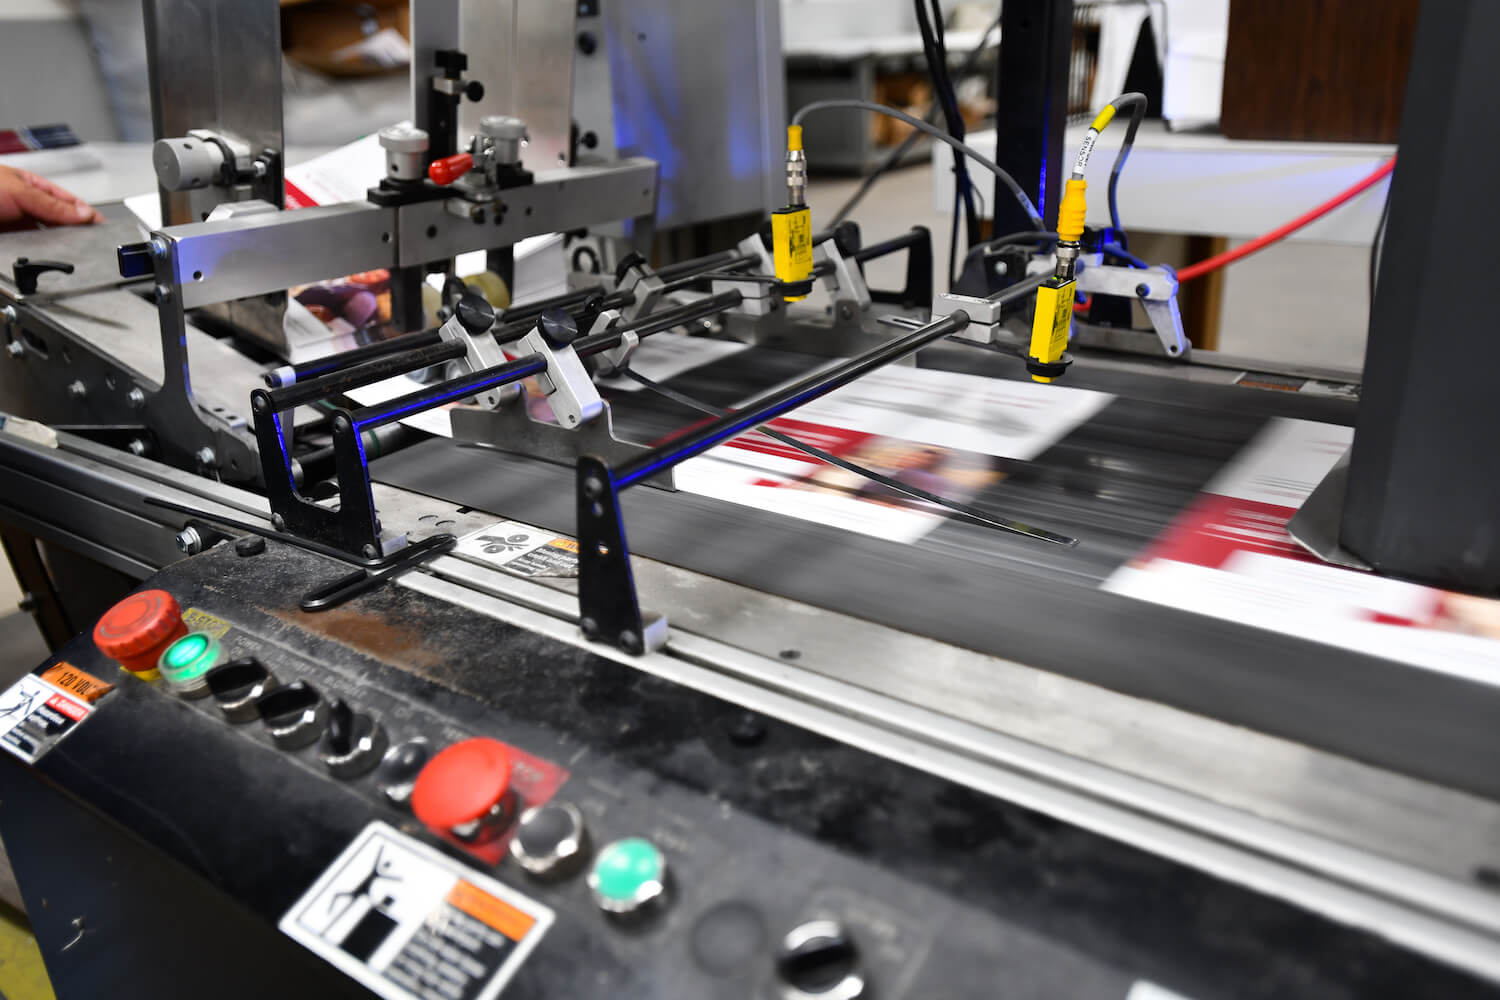 Large-scale printing operation in motion